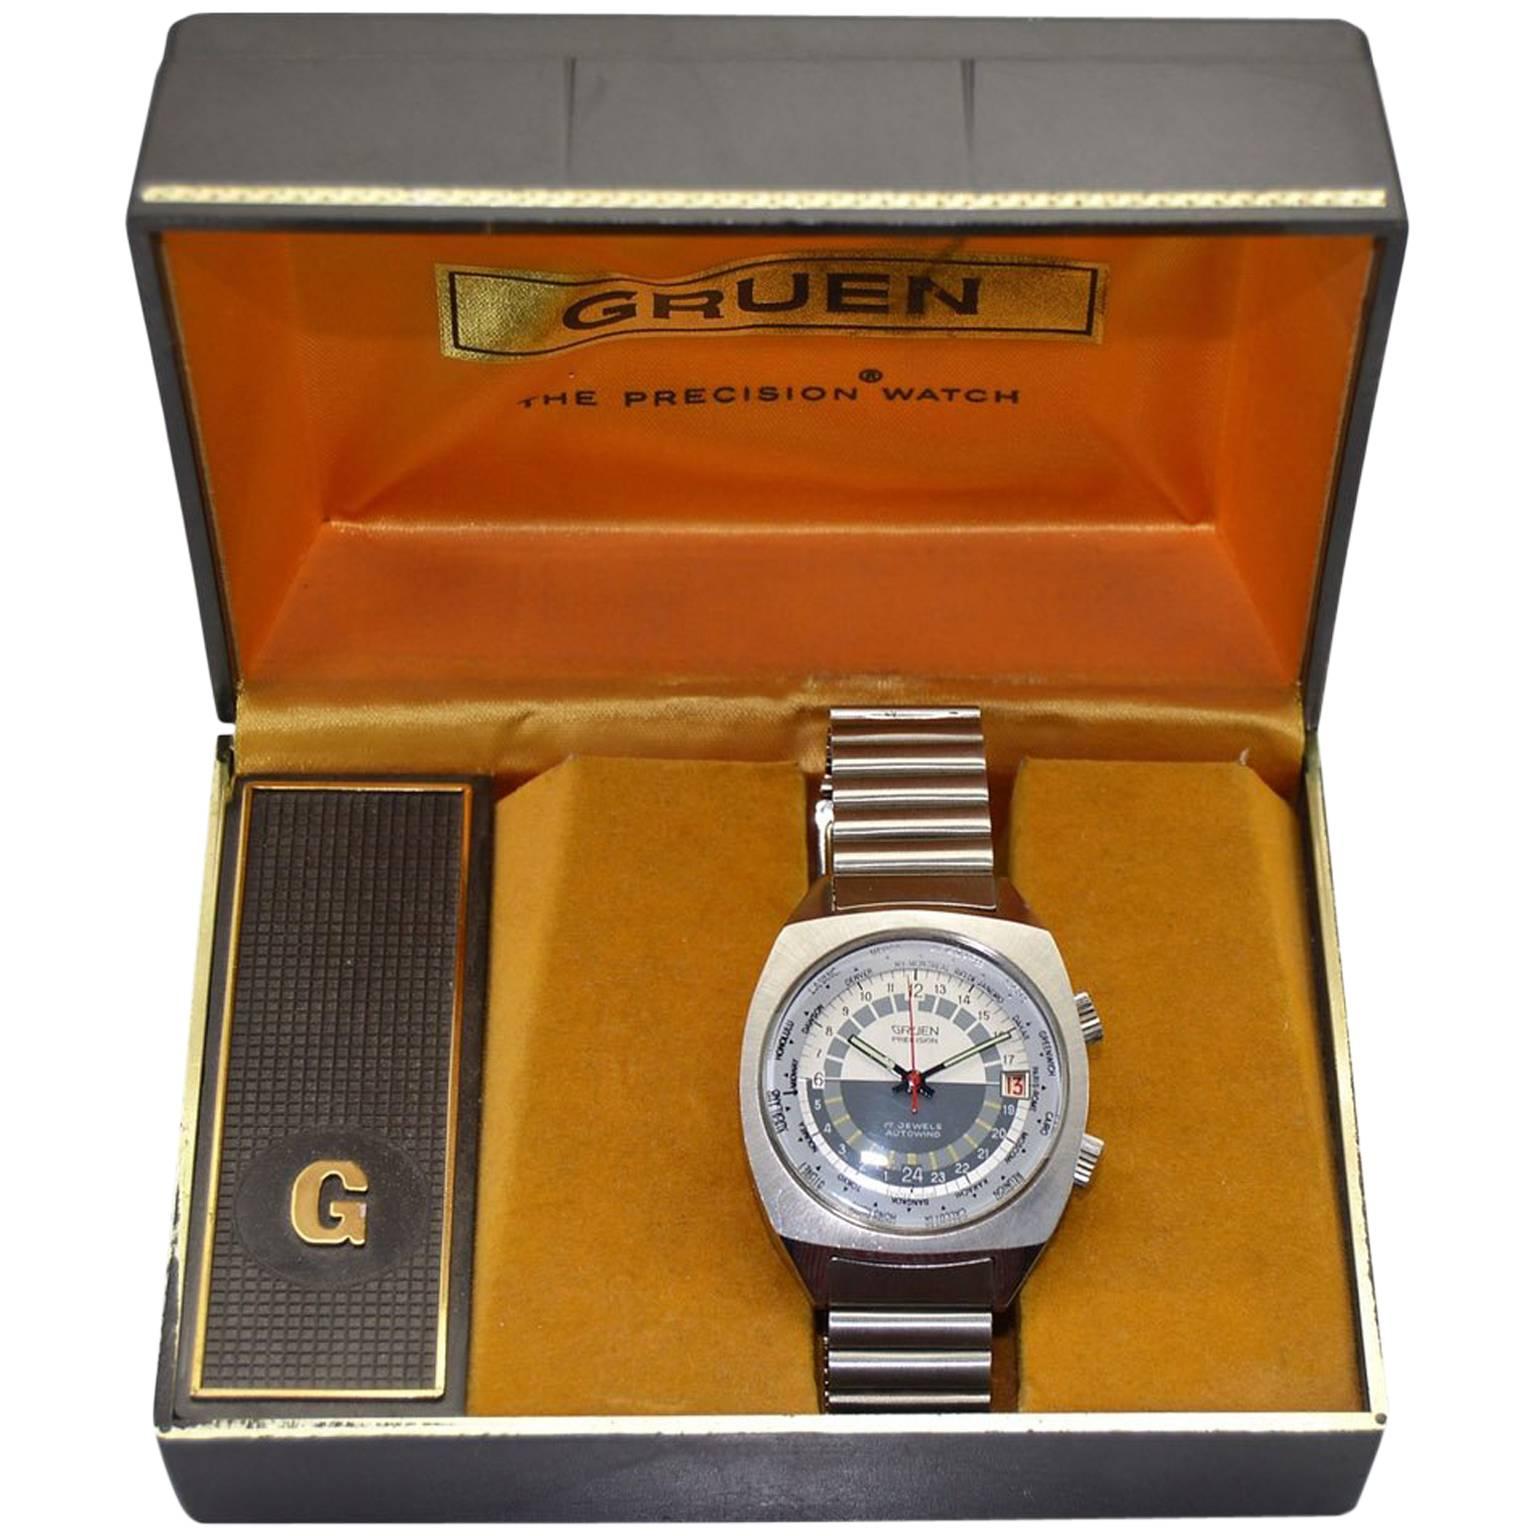 Gruen Stainless Steel New Old Stock World Time Watch, 1960s